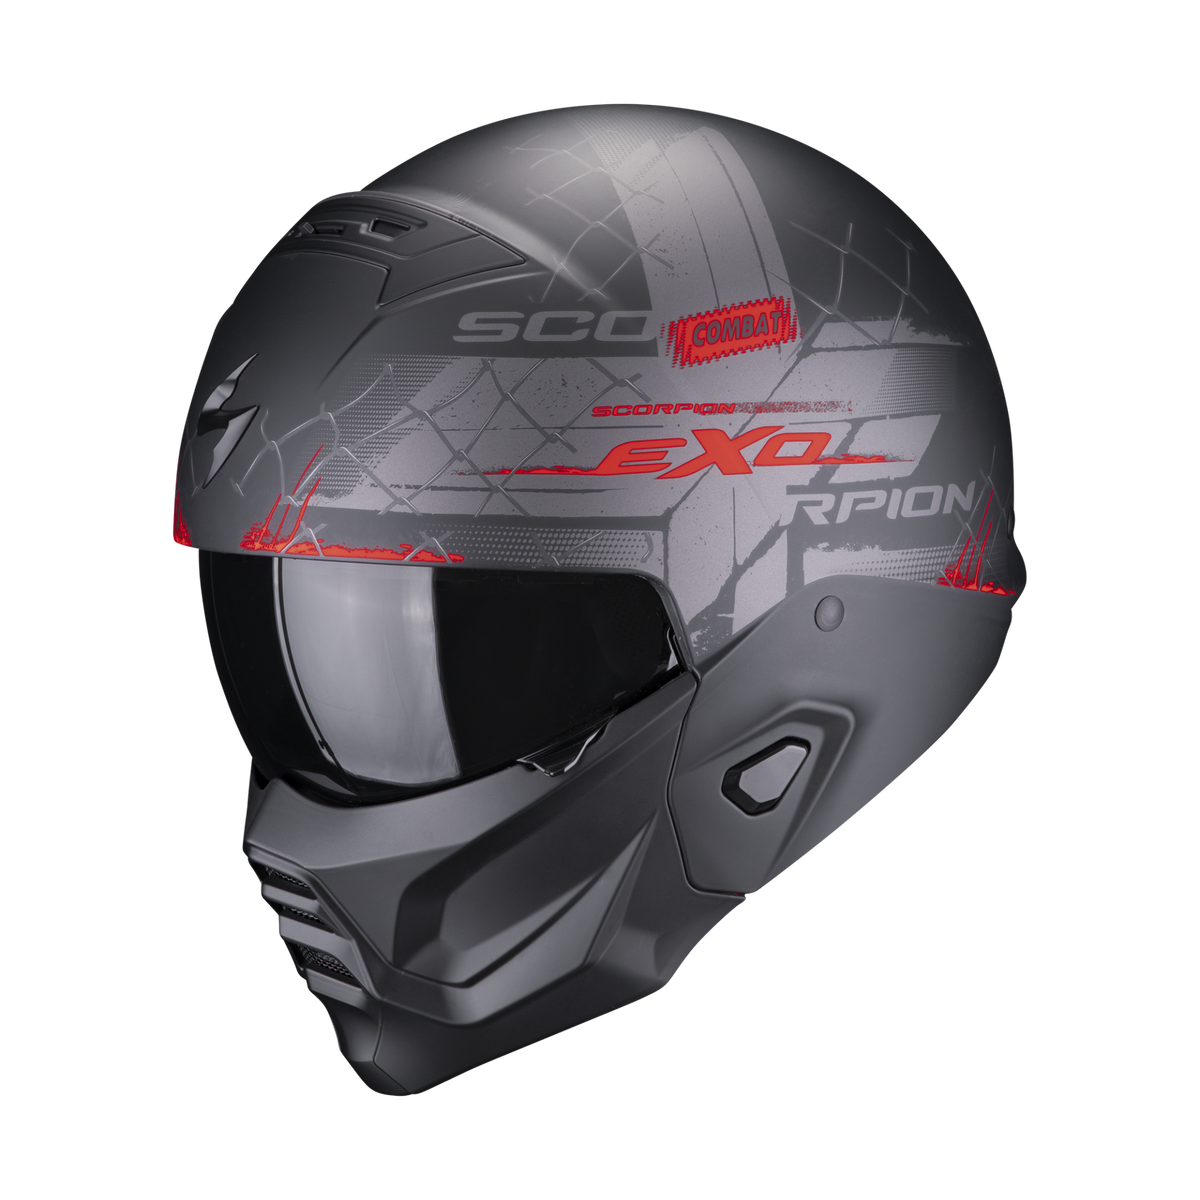 SCORPION EXO-COMBAT II XENON Motorcycle and scooter jet helmet with detachable chin guard Black/Red